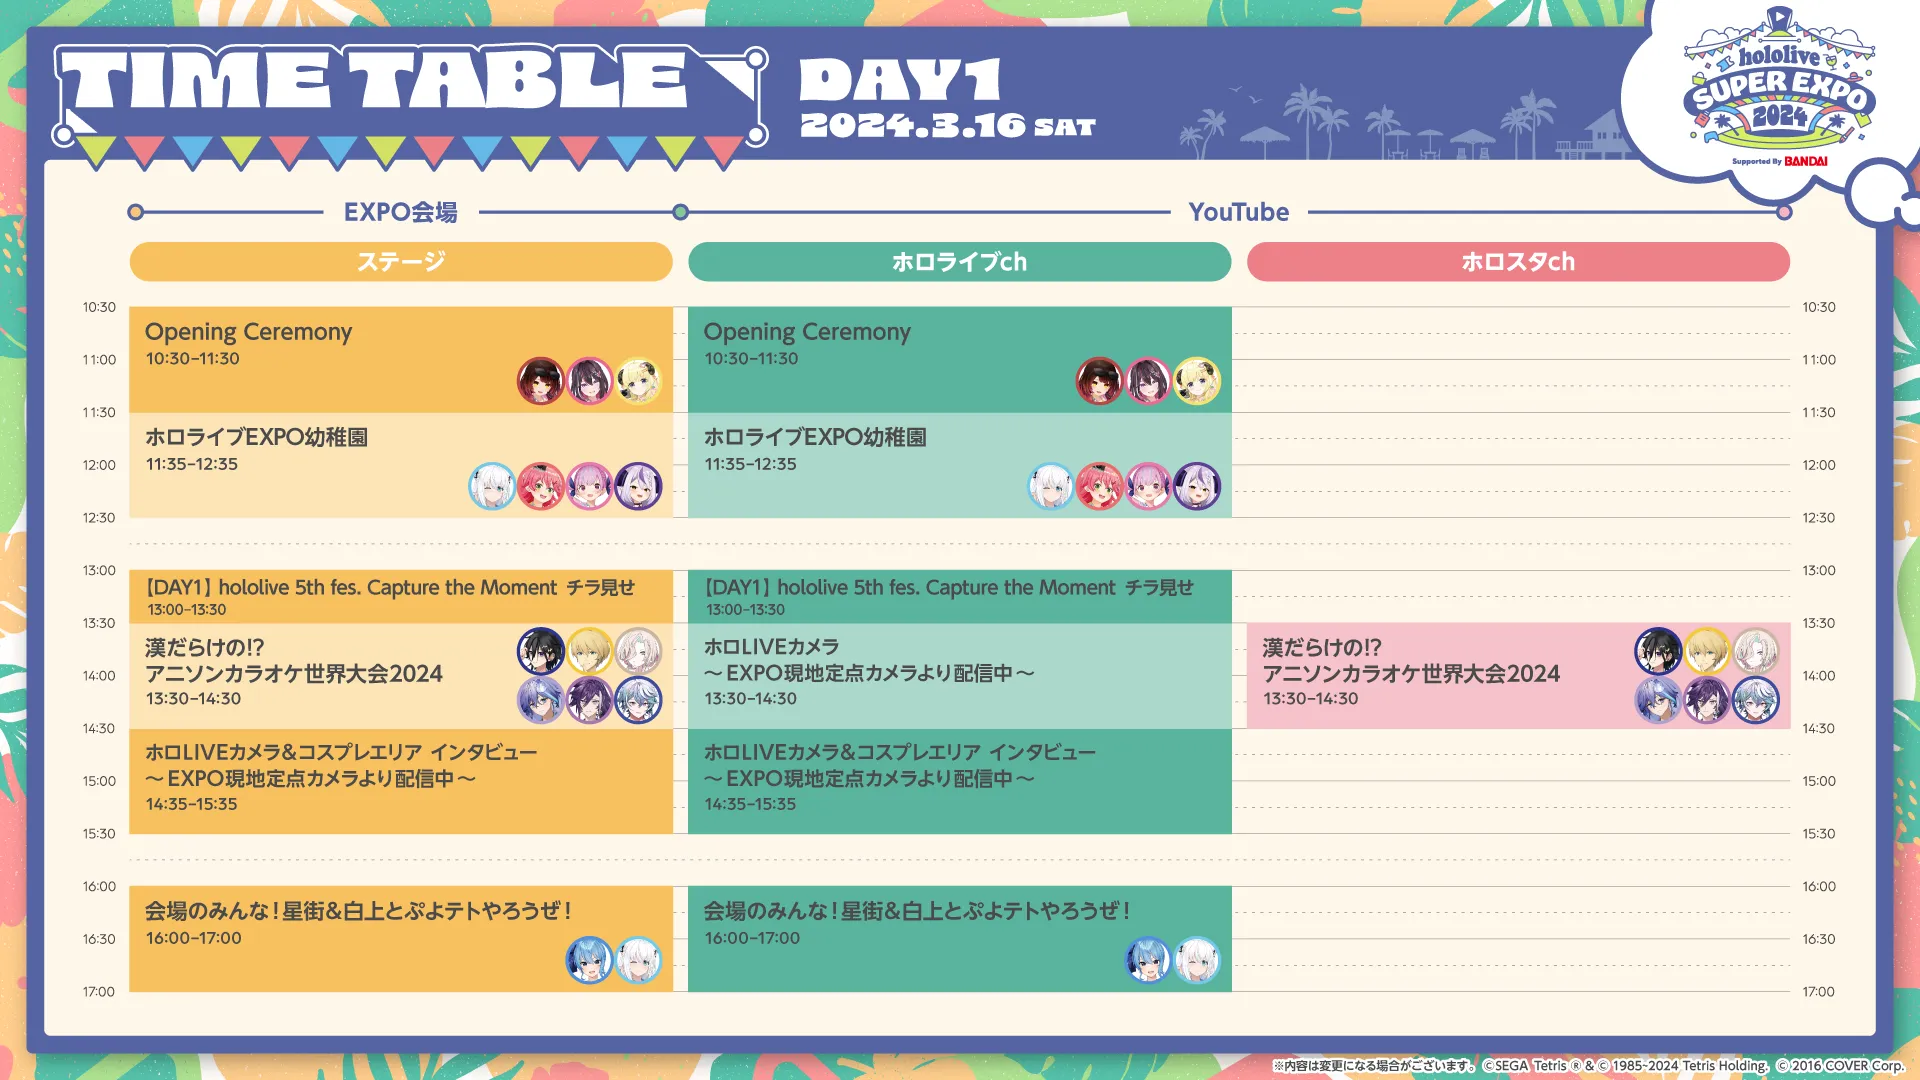 EXPO Stage DAY1 | hololive SUPER EXPO 2024 & hololive 5th fes 